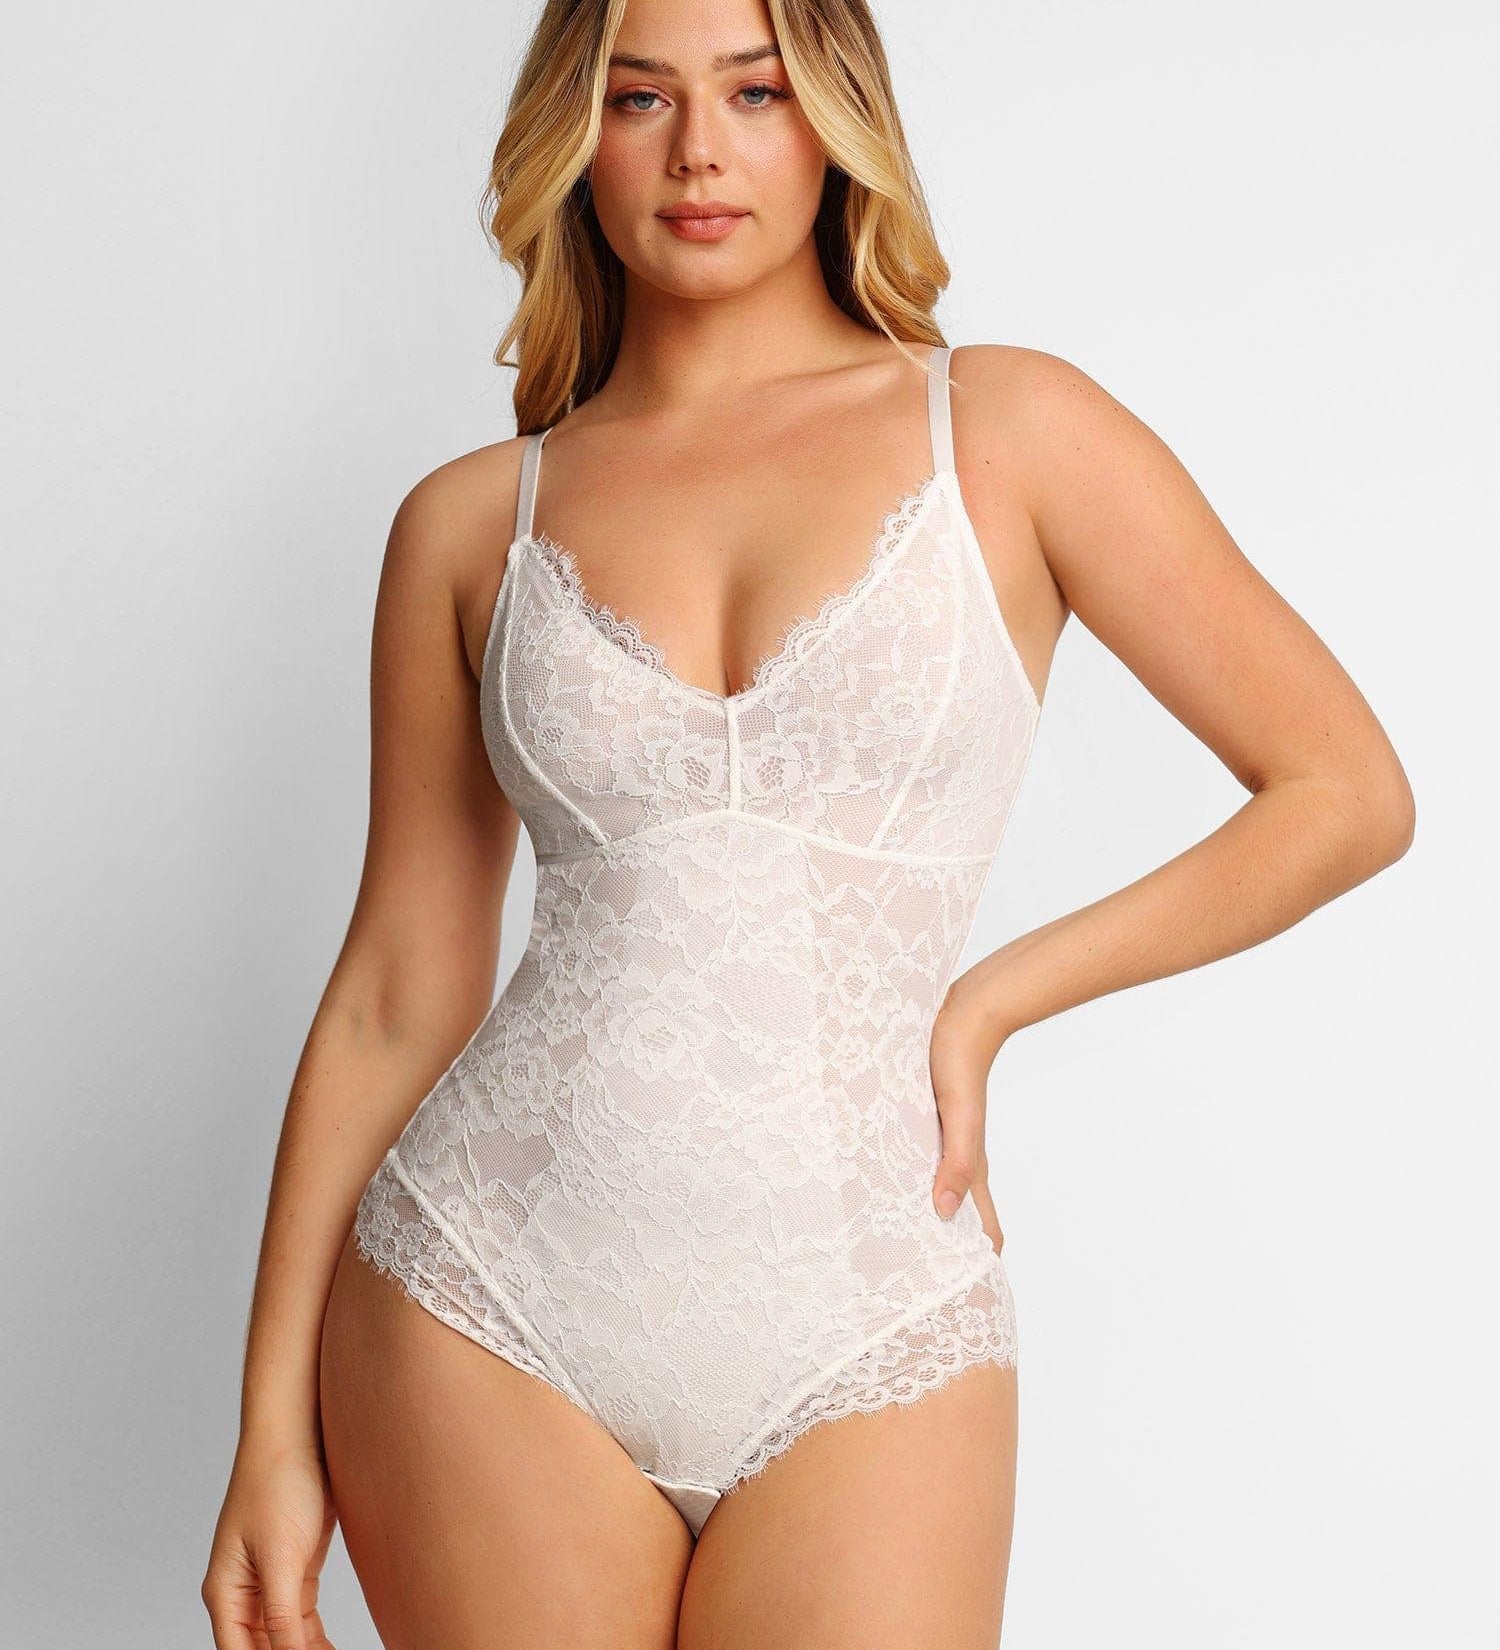 Lace Smooth Firm Control Thong Bodysuit | 1 + 1 Gratis